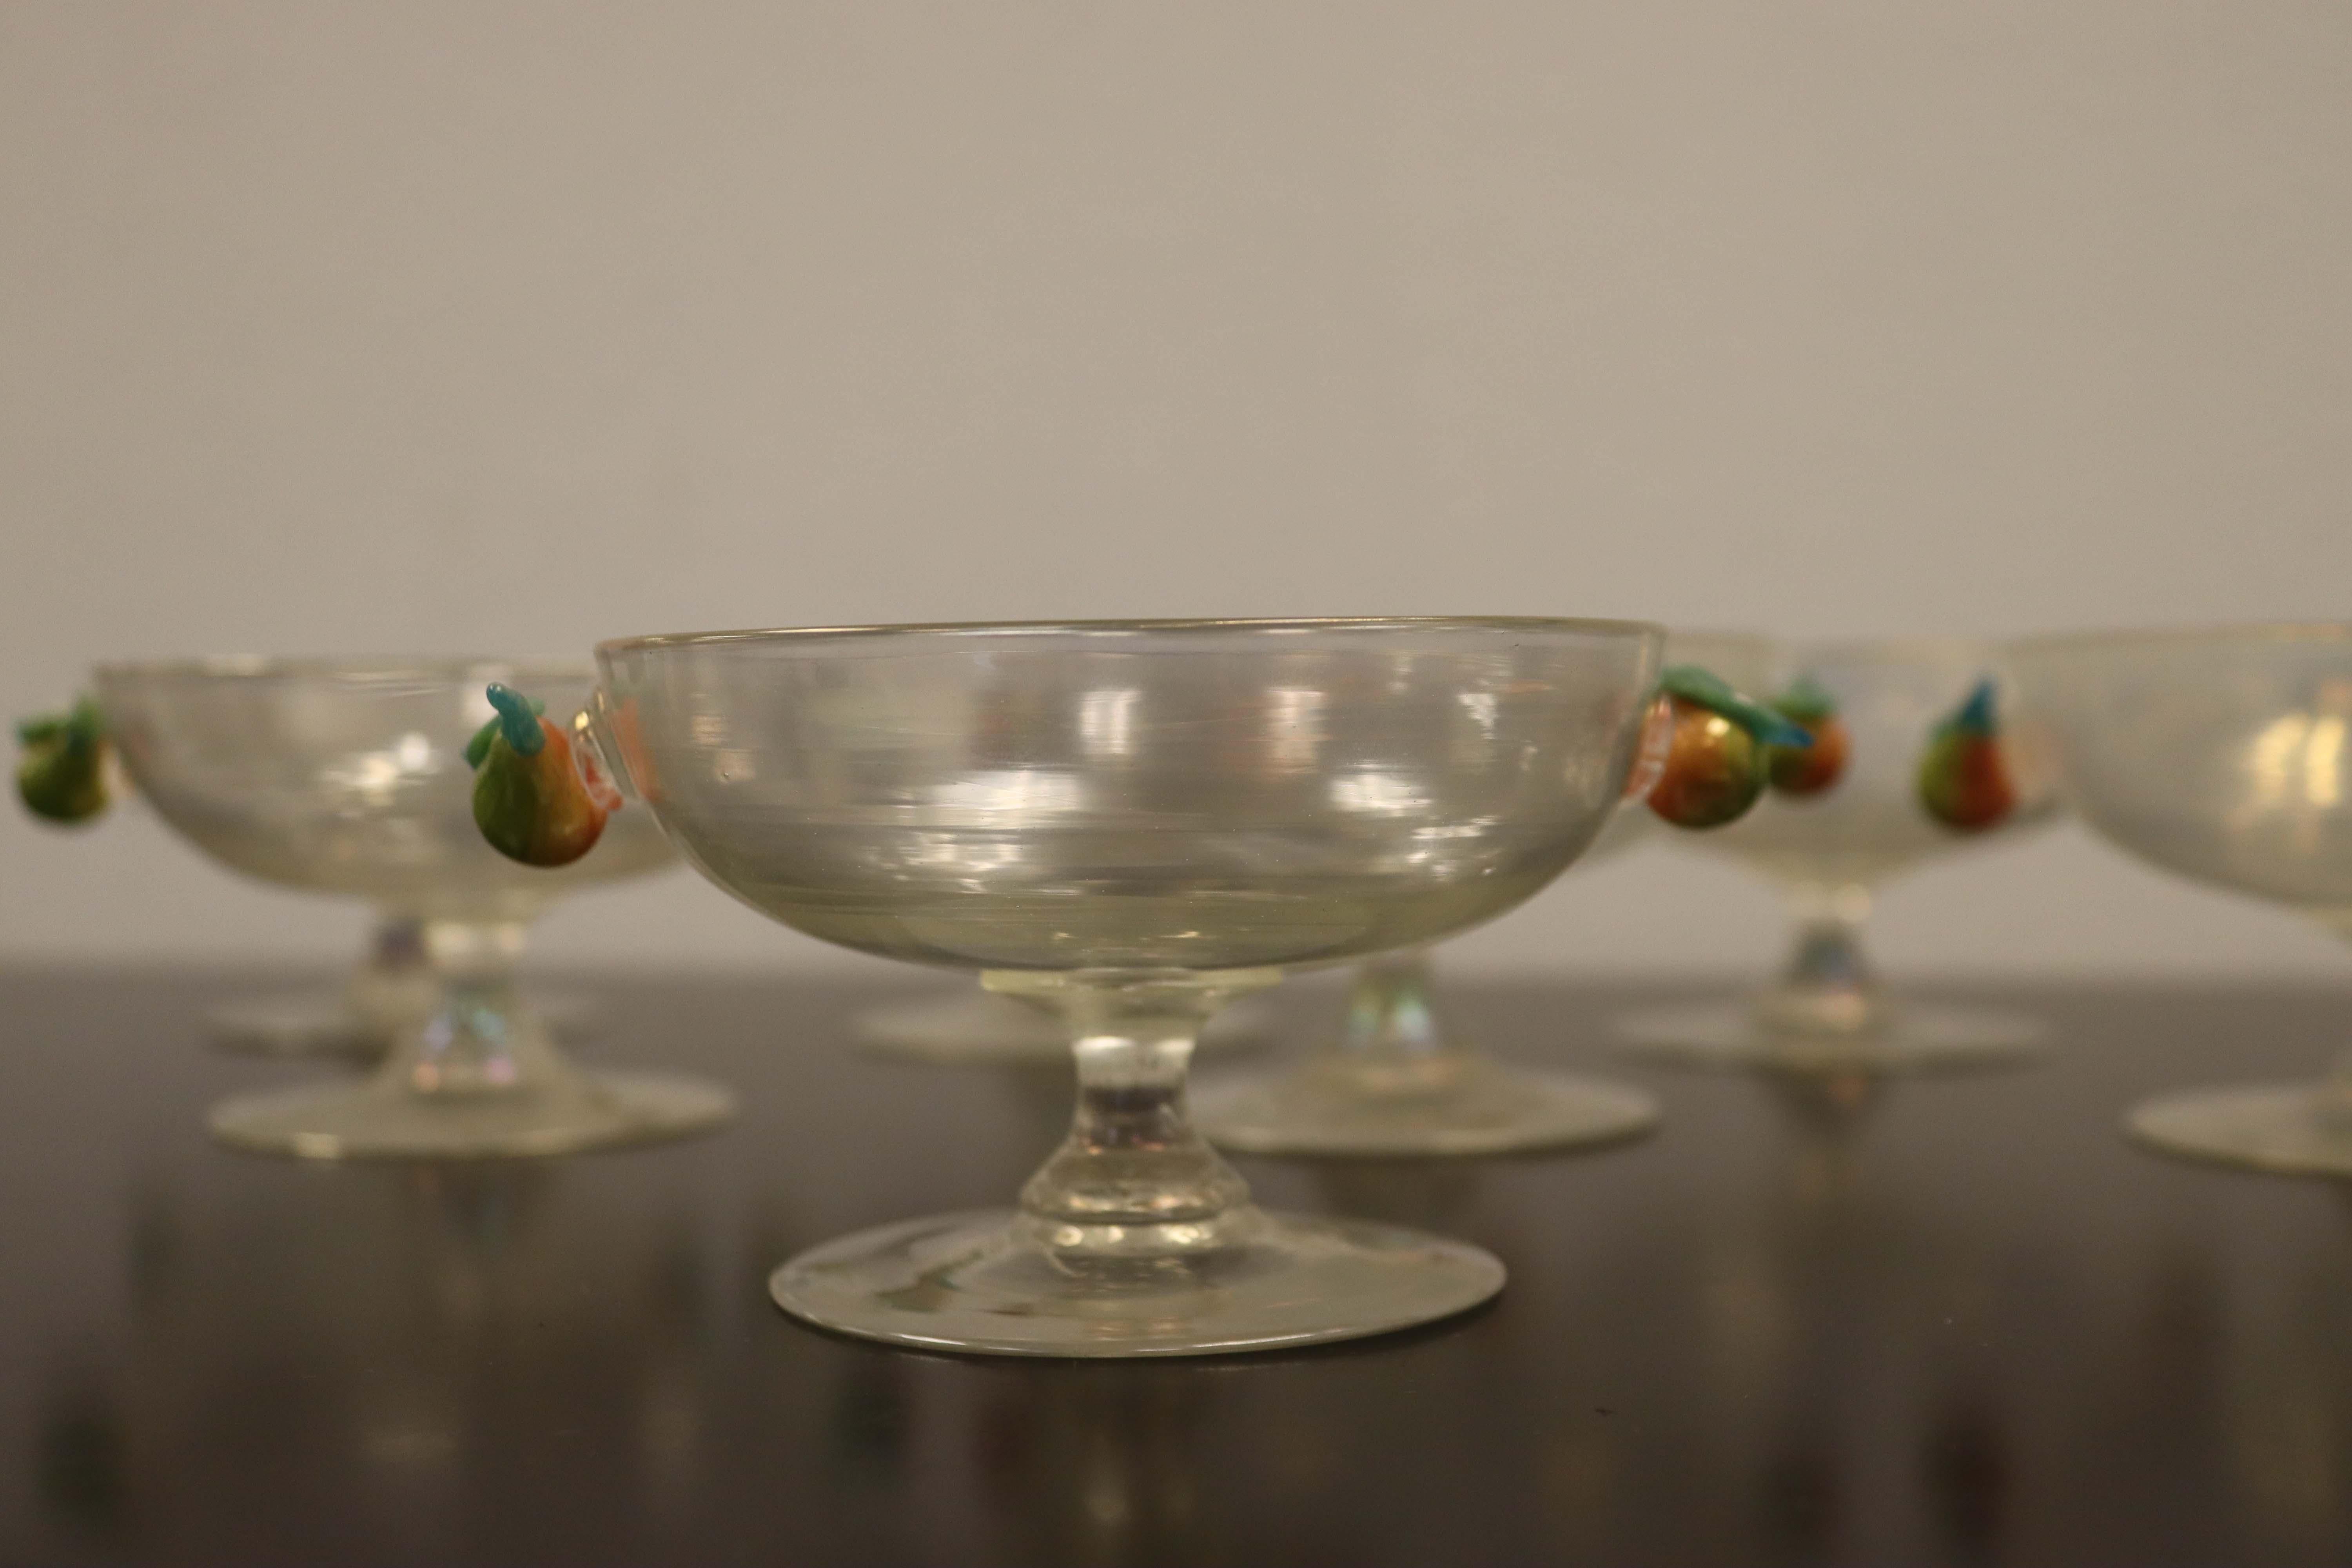 Lovely set of 8 compote serving glasses by Steuben with 2 hand blown, decorative pears adorning each.

In very good condition, with nearly imperceptible flea bite chips on the pear leaf. The rims are in perfect condition.